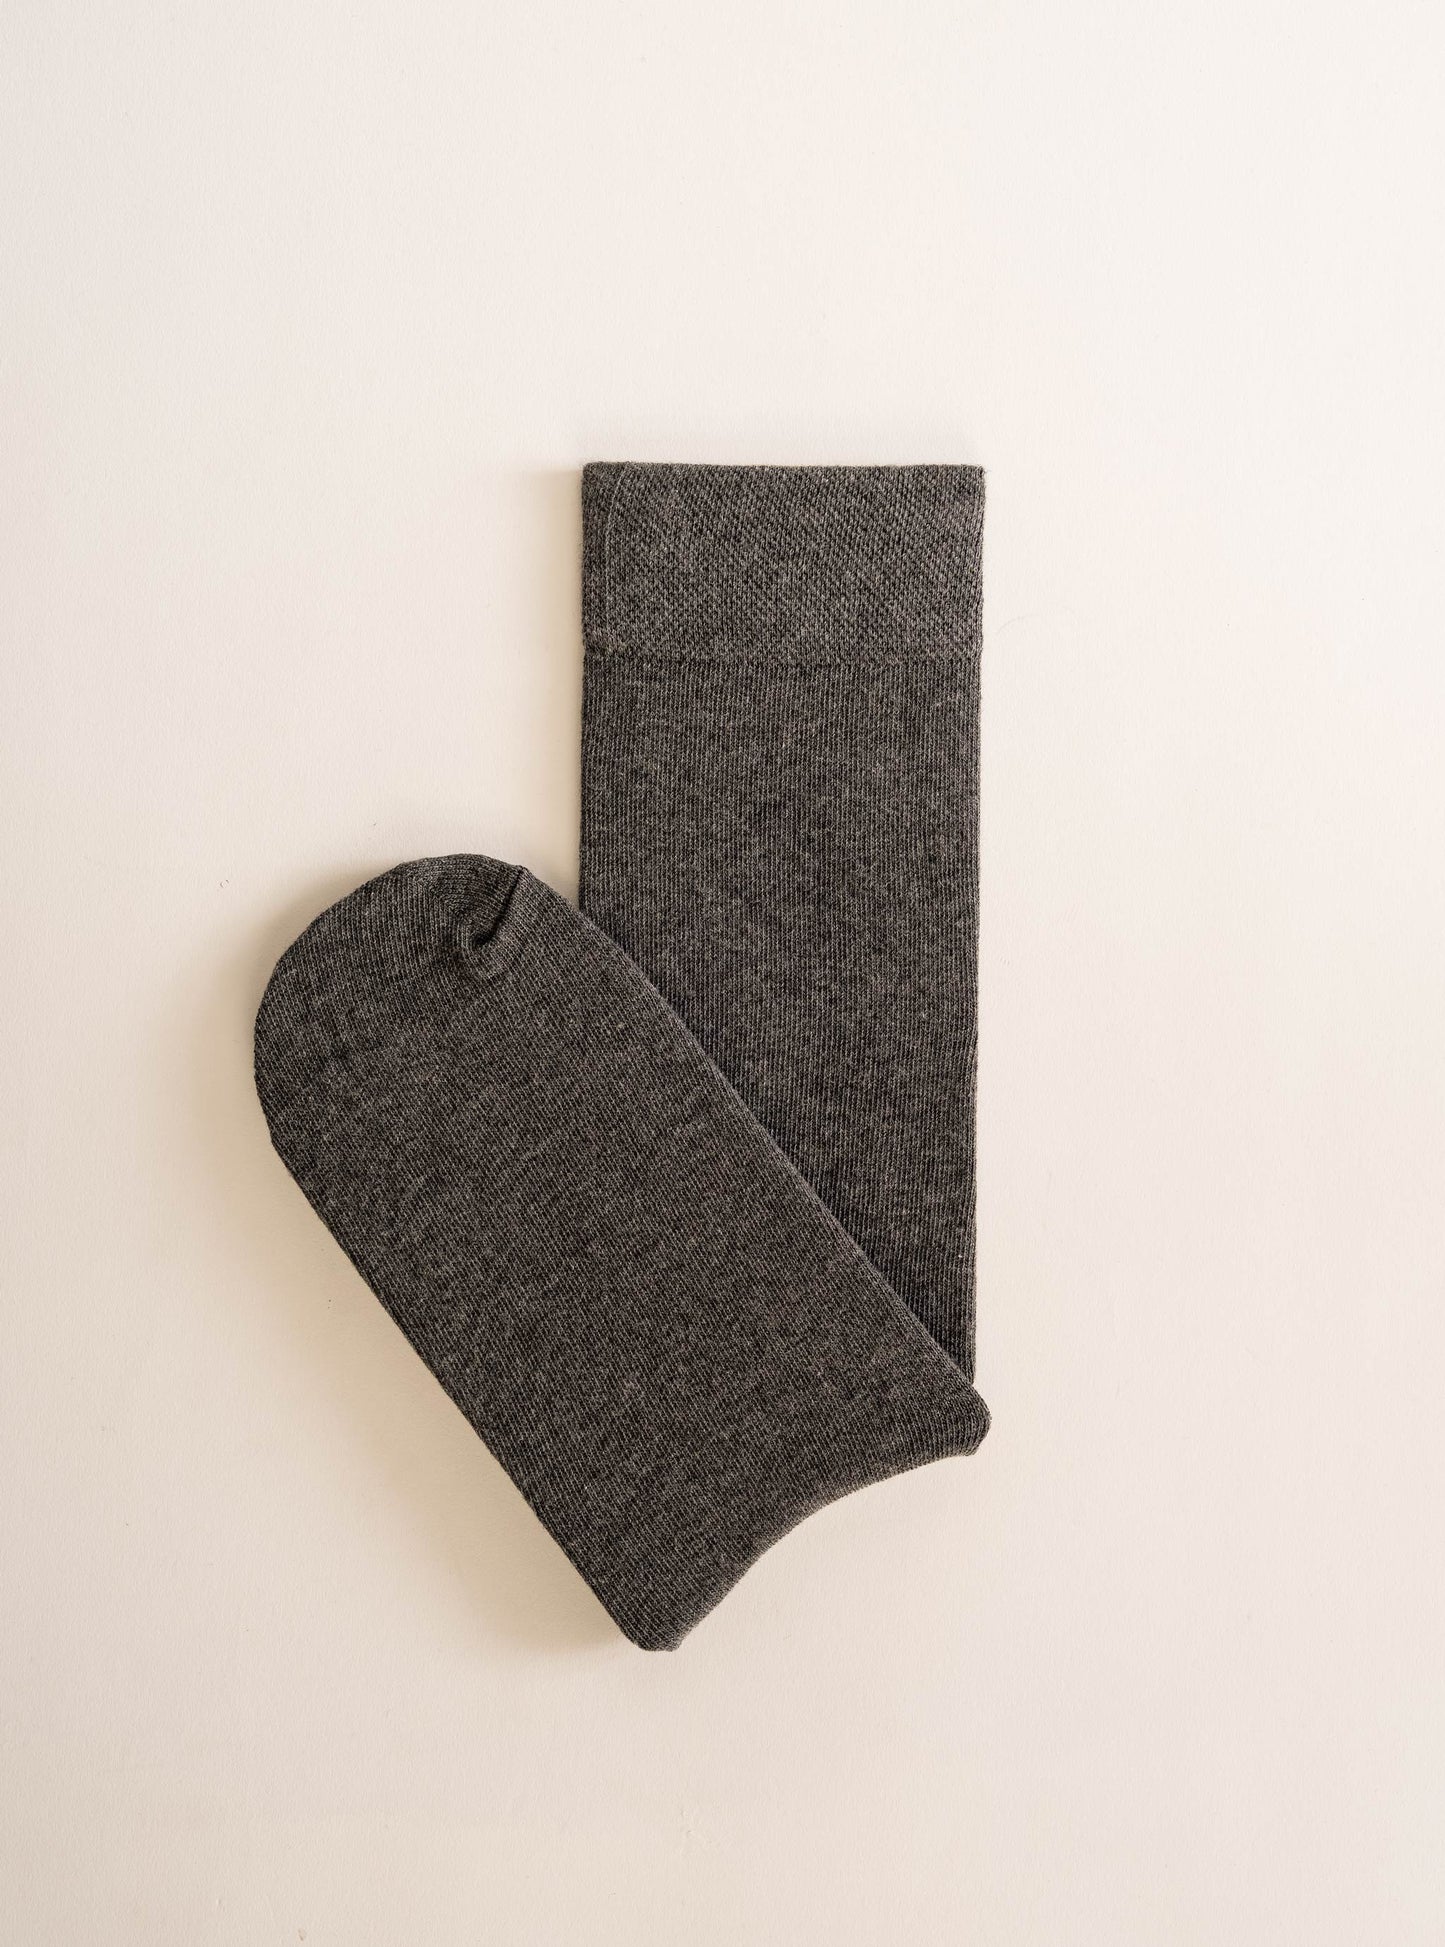 Diaval Socks, Gris Obscuro